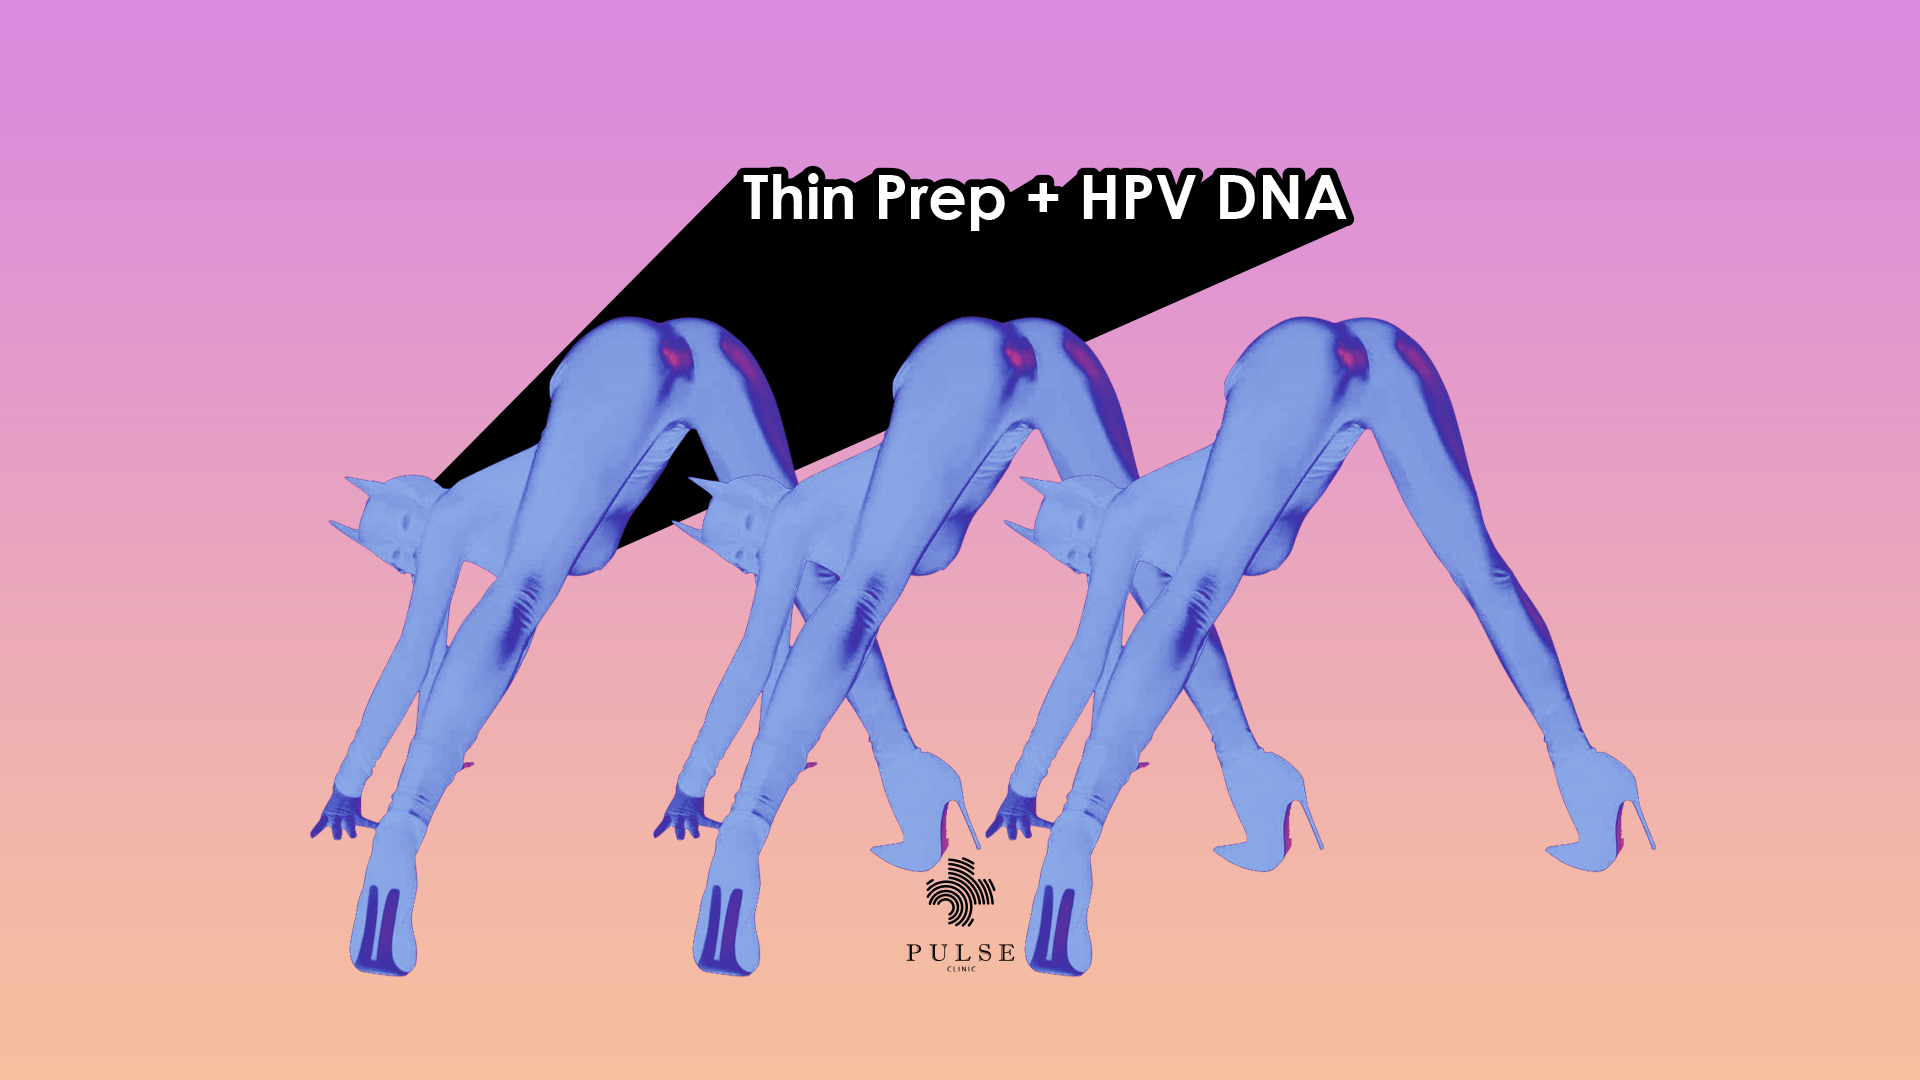 Thin Prep, HPV DNA Test for Cervical Cancer and HPV Vaccine by Female Doctor